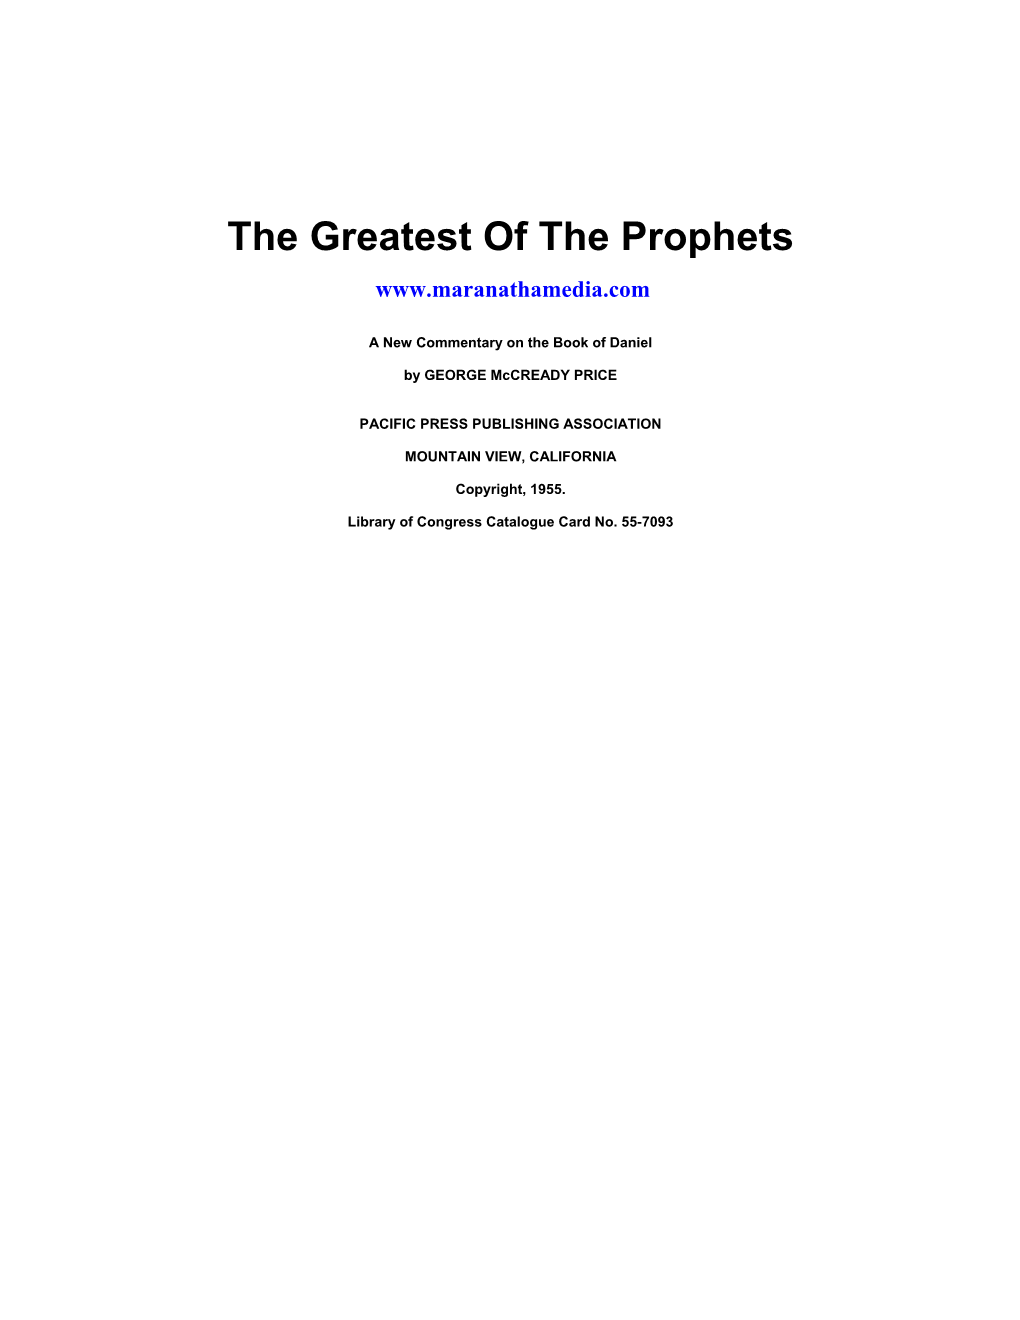 Greatest of the Prophets (1955)